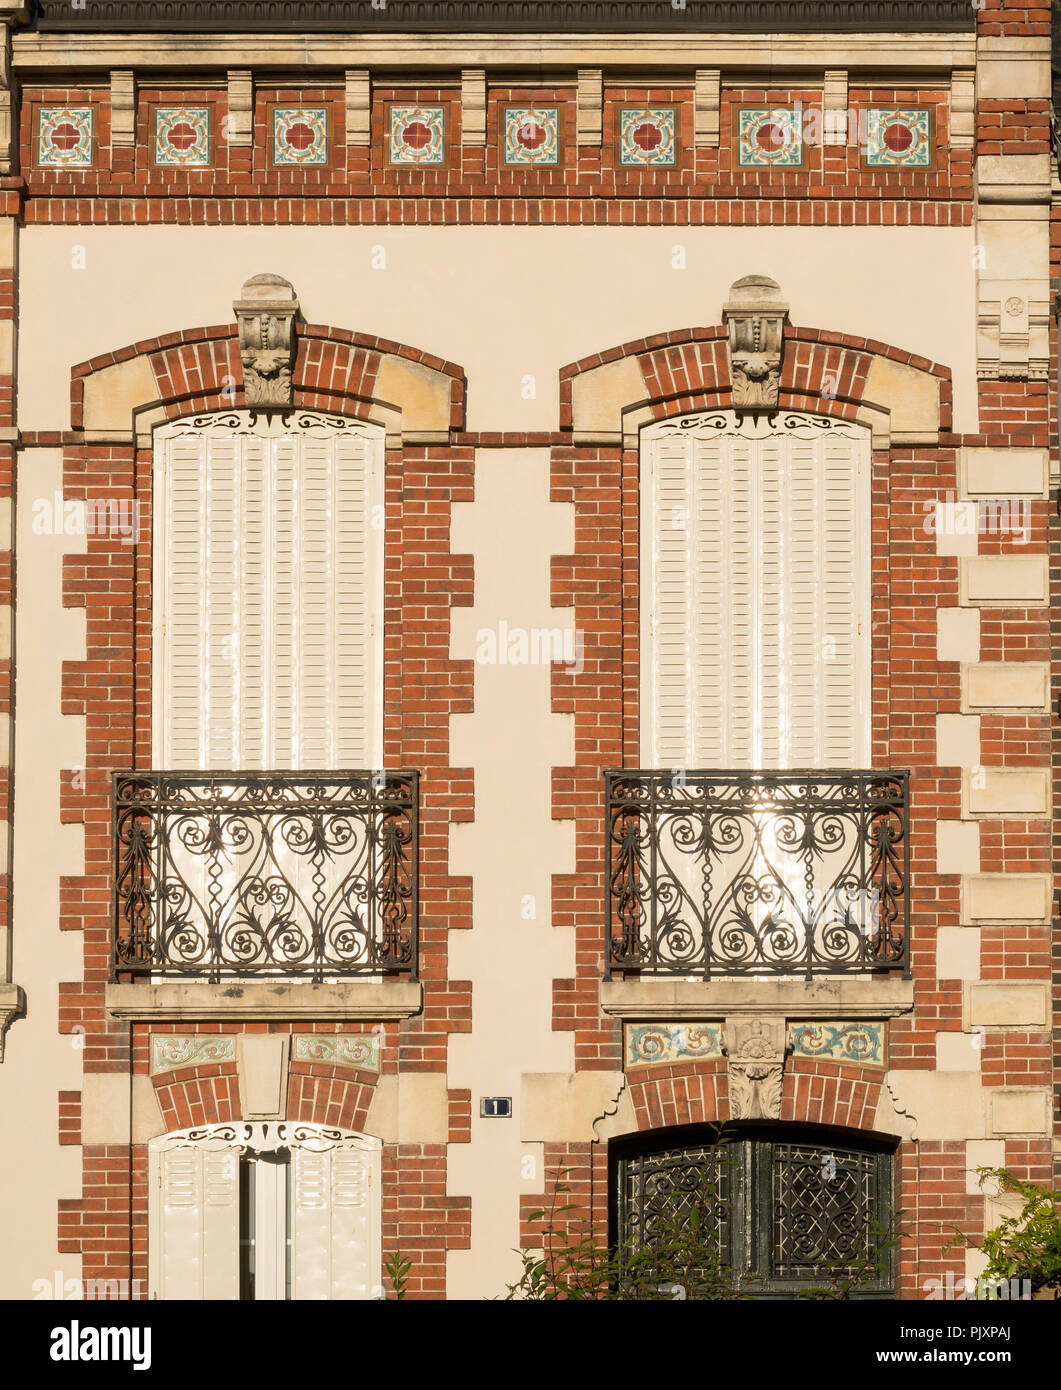 Detail view of house window shutters and decorative brickwork, Jargeau, Loiret department, France, Europe Stock Photo